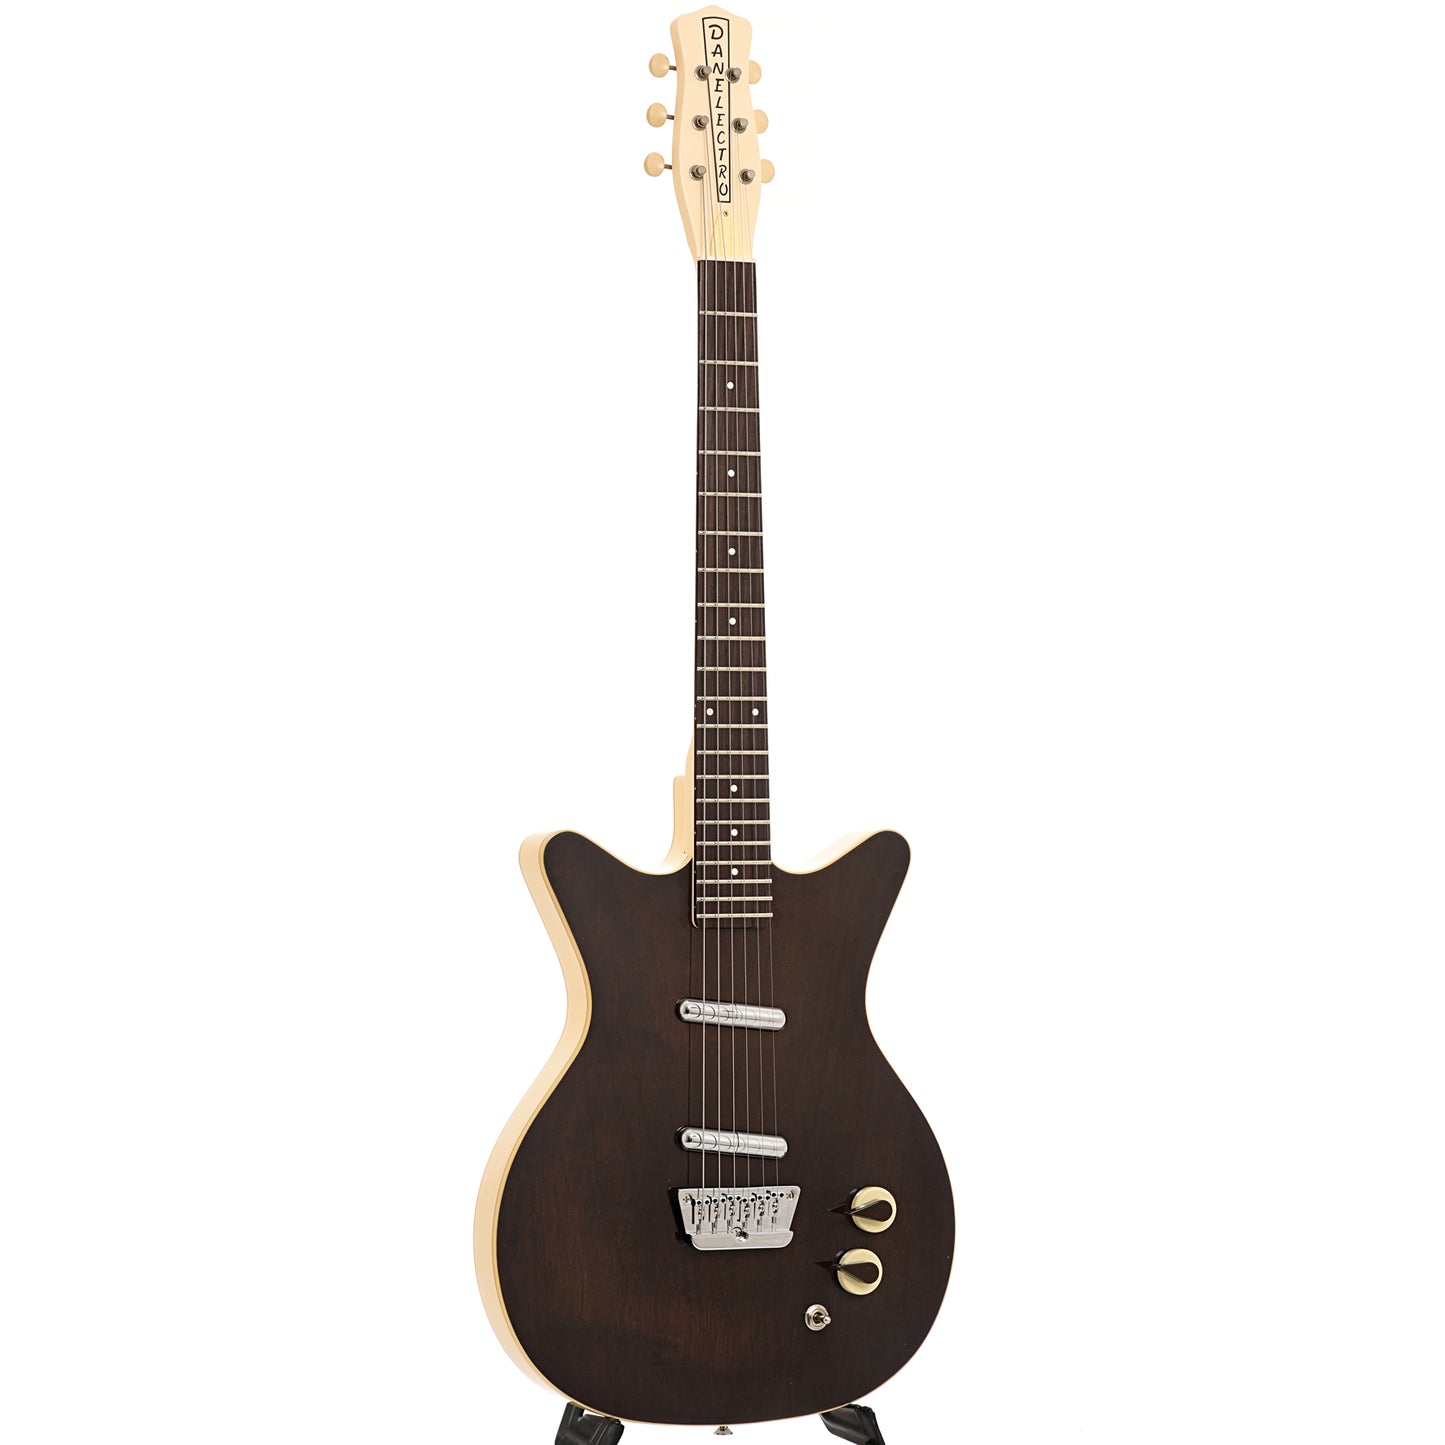 Full front and side of Danelectro '59 Divine, Dark Walnut